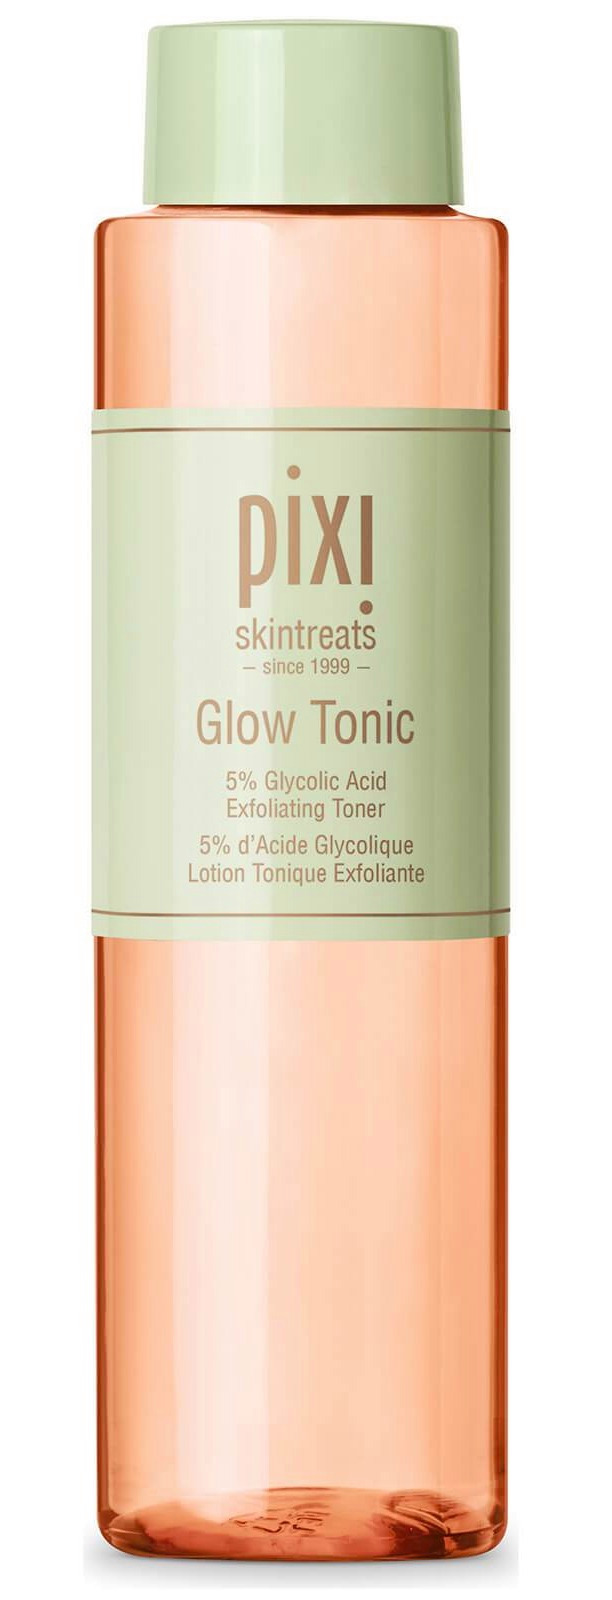 Why spend £18 on the Pixi Glow Tonic...